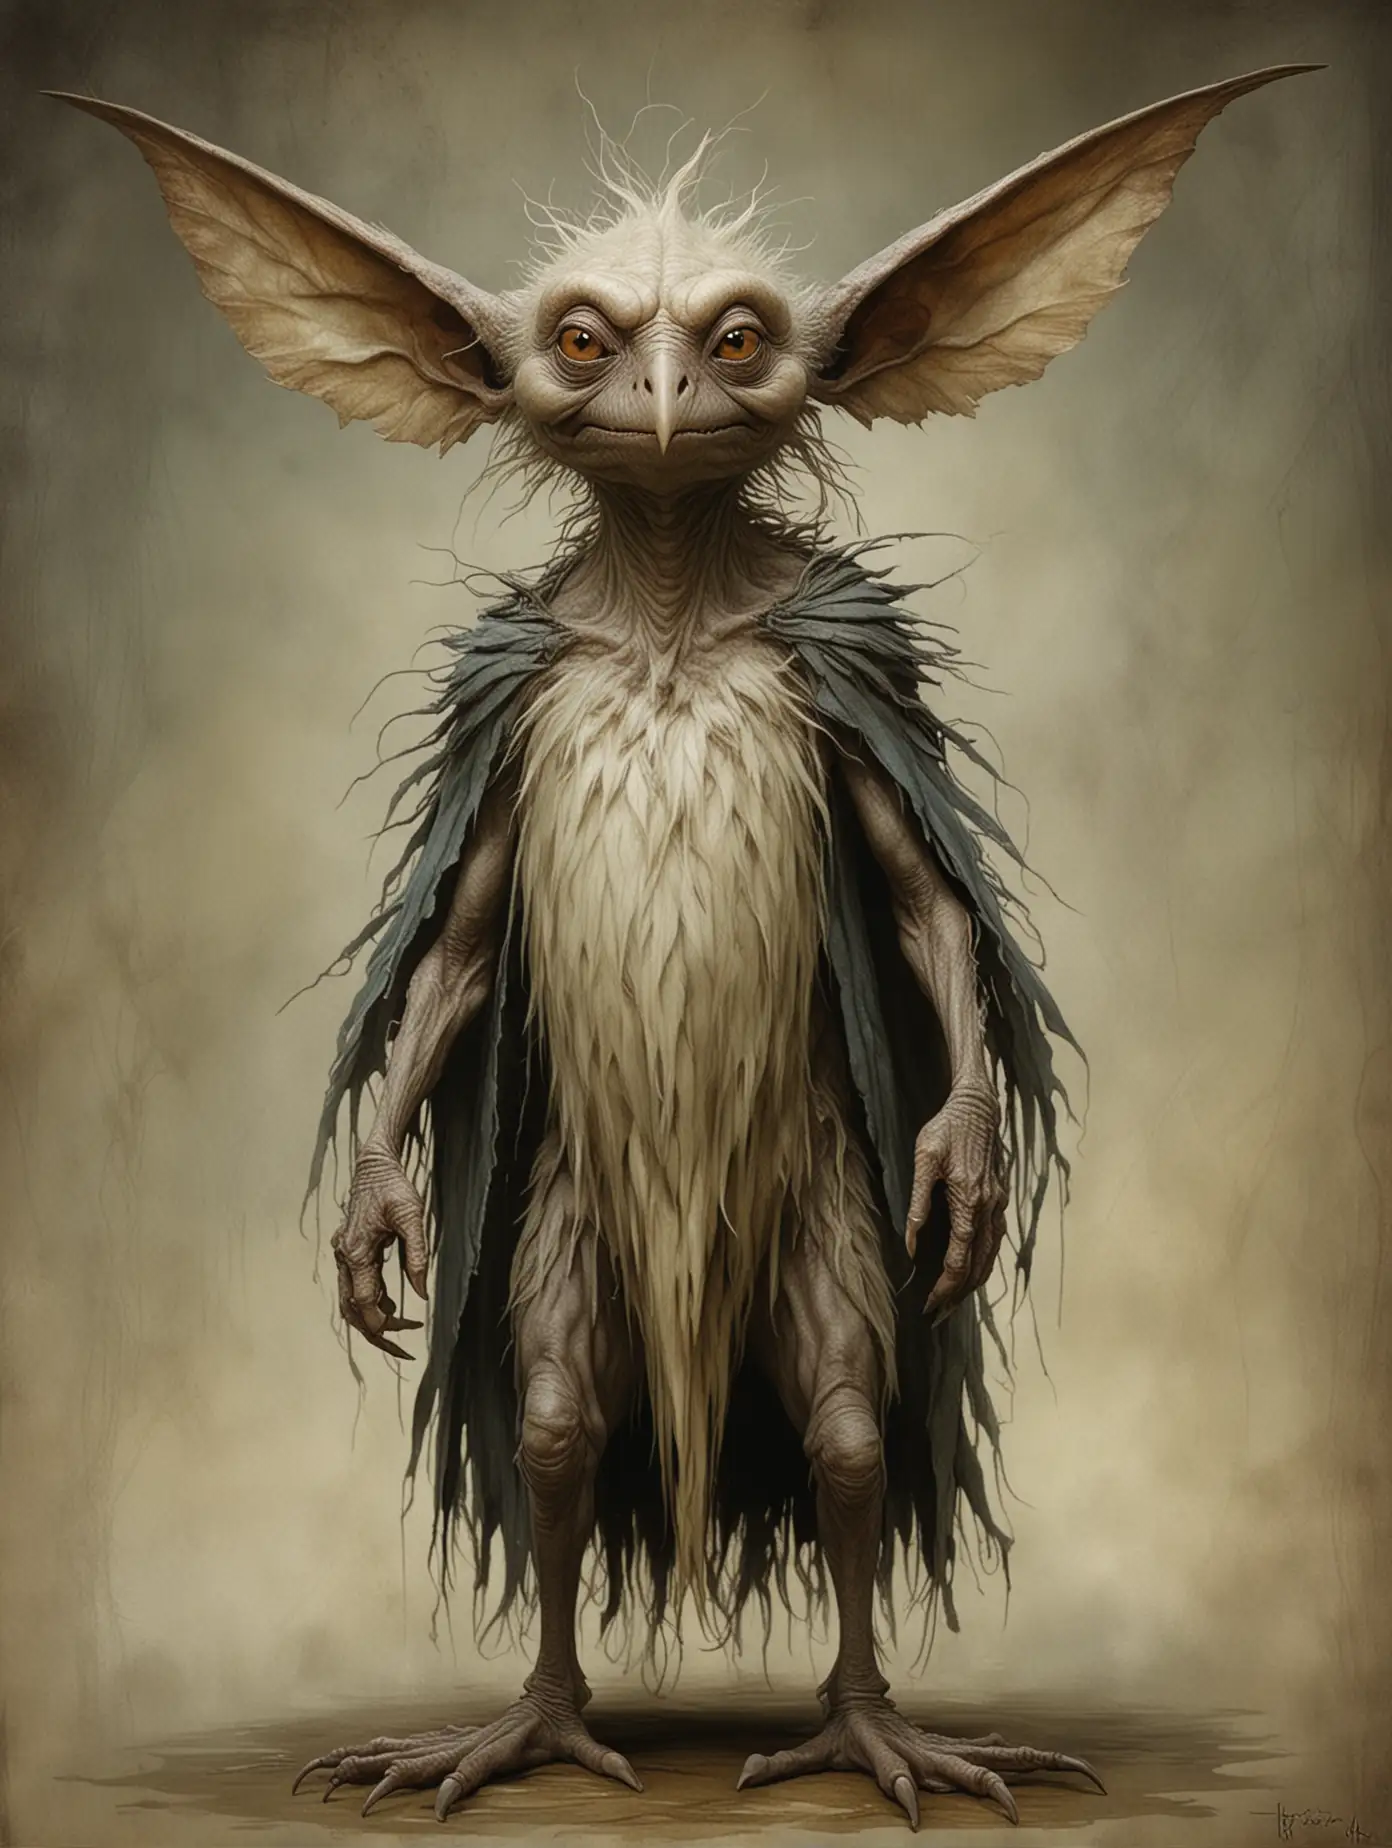 Photorealistic, full-body image of pukwudgie as imagined by Brian Froud.